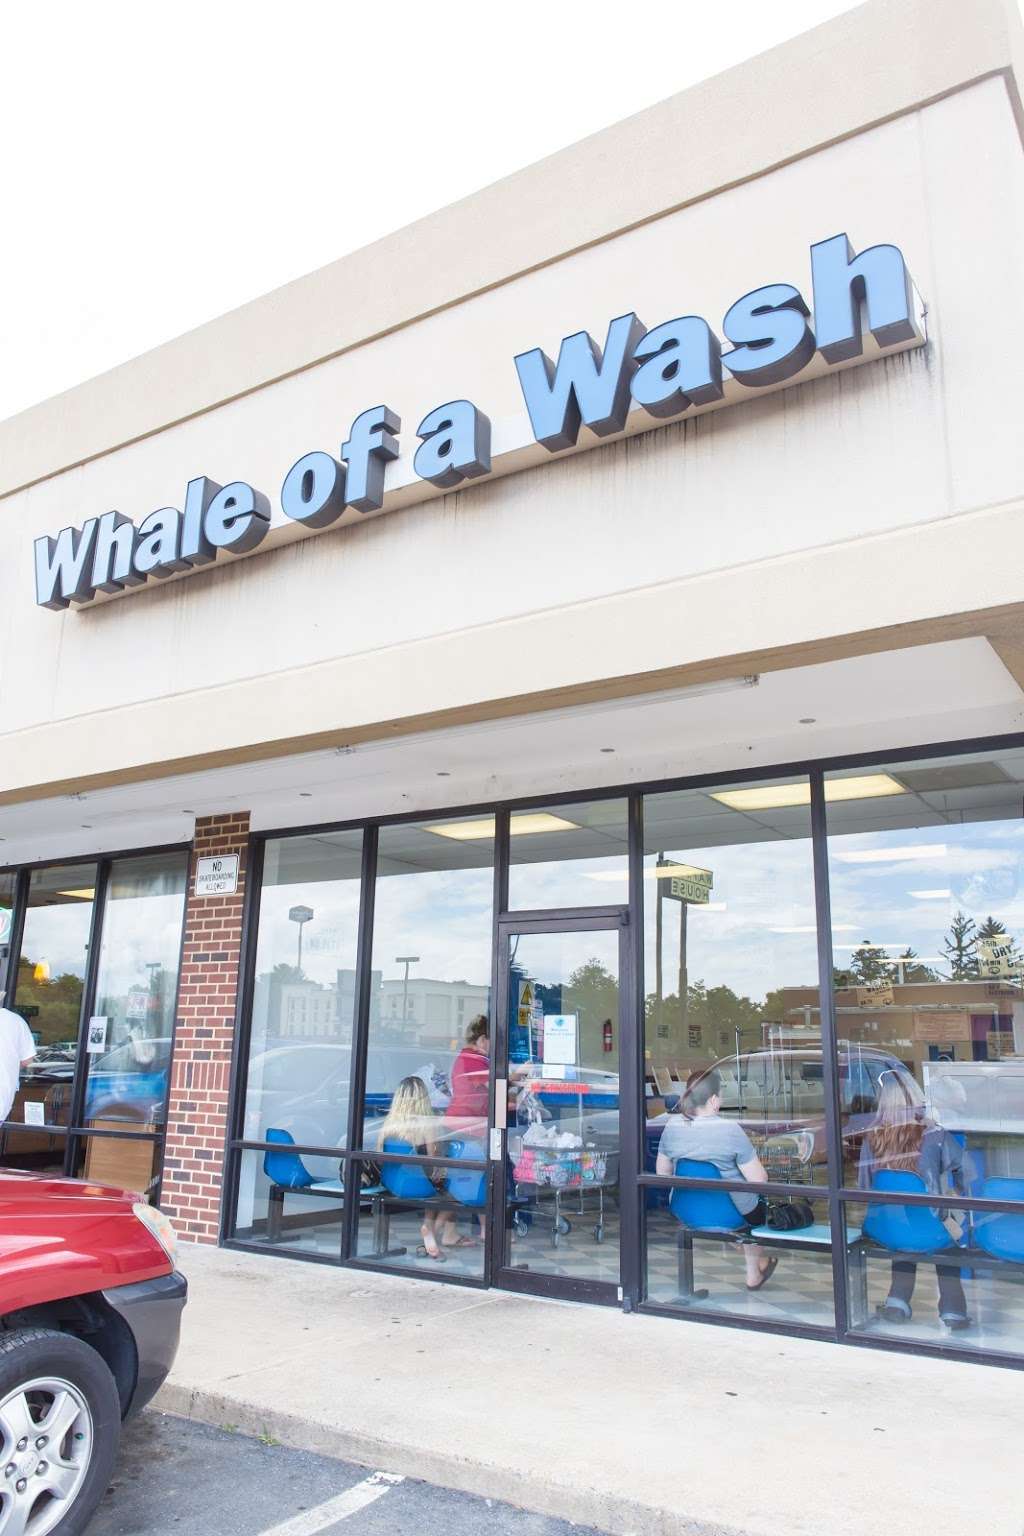 Whale of a Wash Laundromat | 4803 Gerrardstown Rd unit f, Inwood, WV 25428, USA | Phone: (304) 876-0088